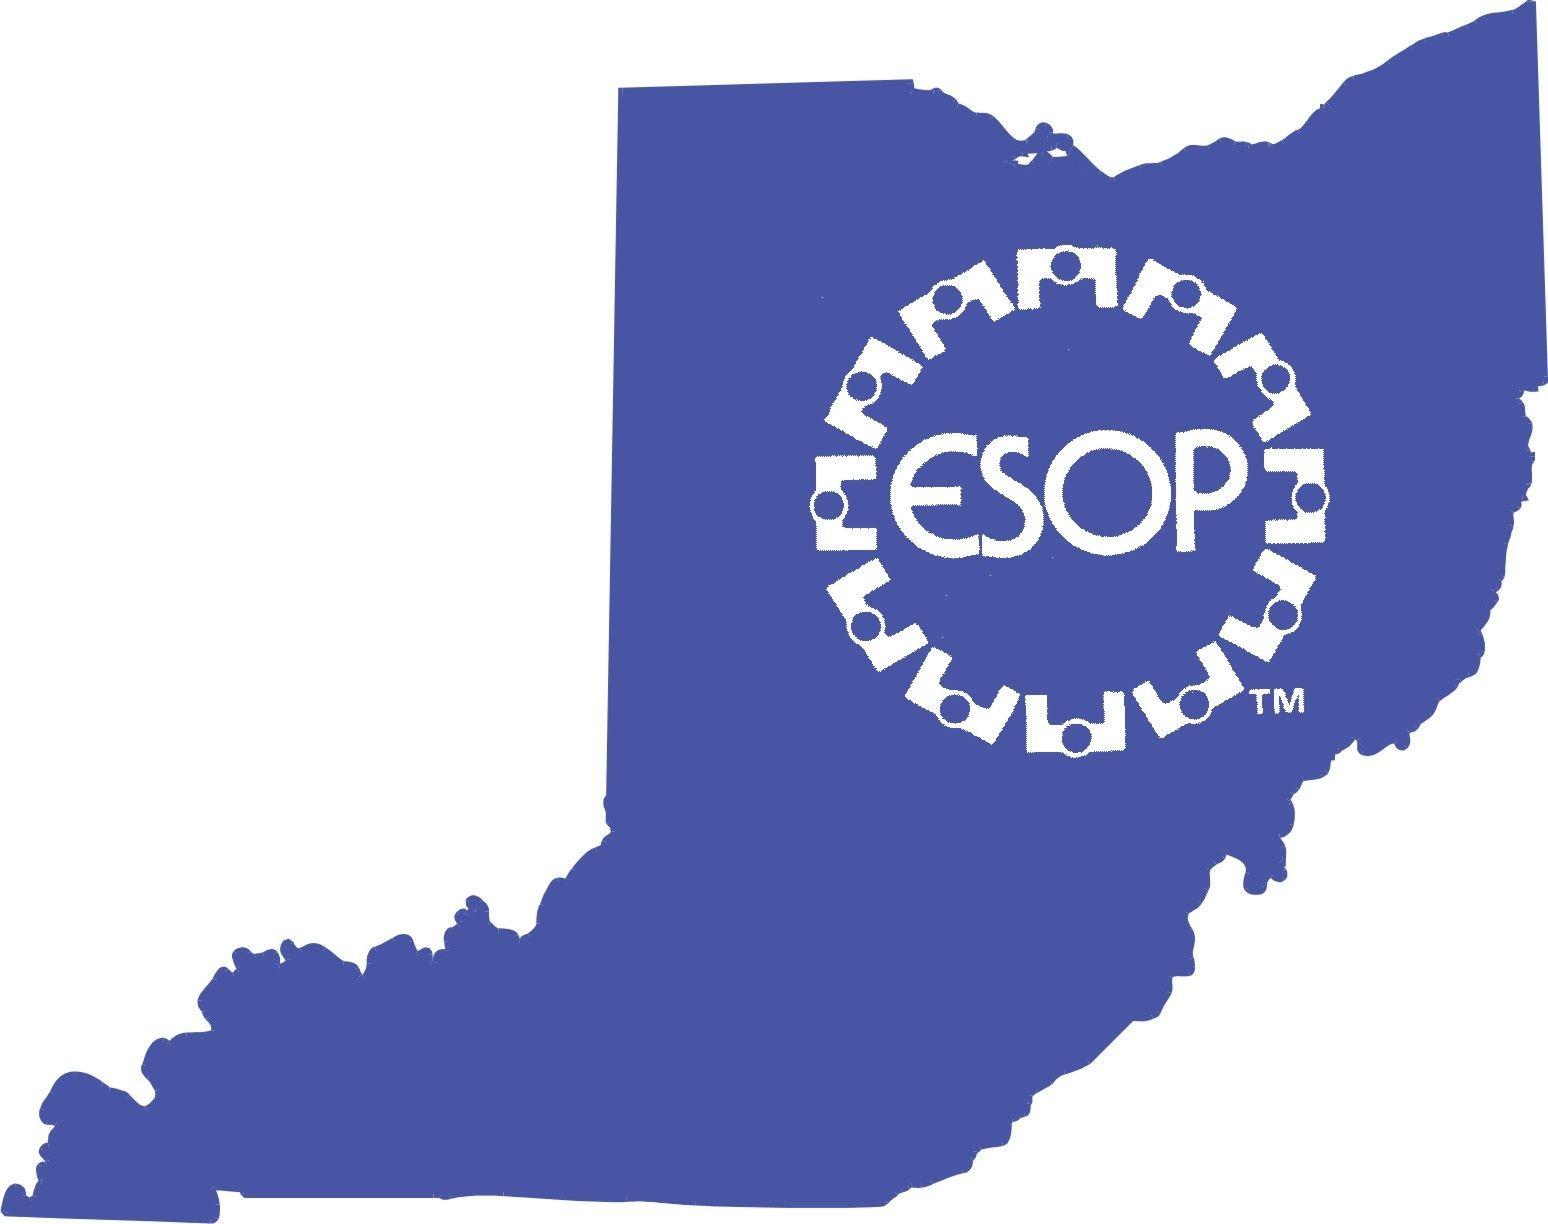 ESOP Logo - Ohio/Kentucky Chapter Wins Big at ESOP Association's Annual Conference